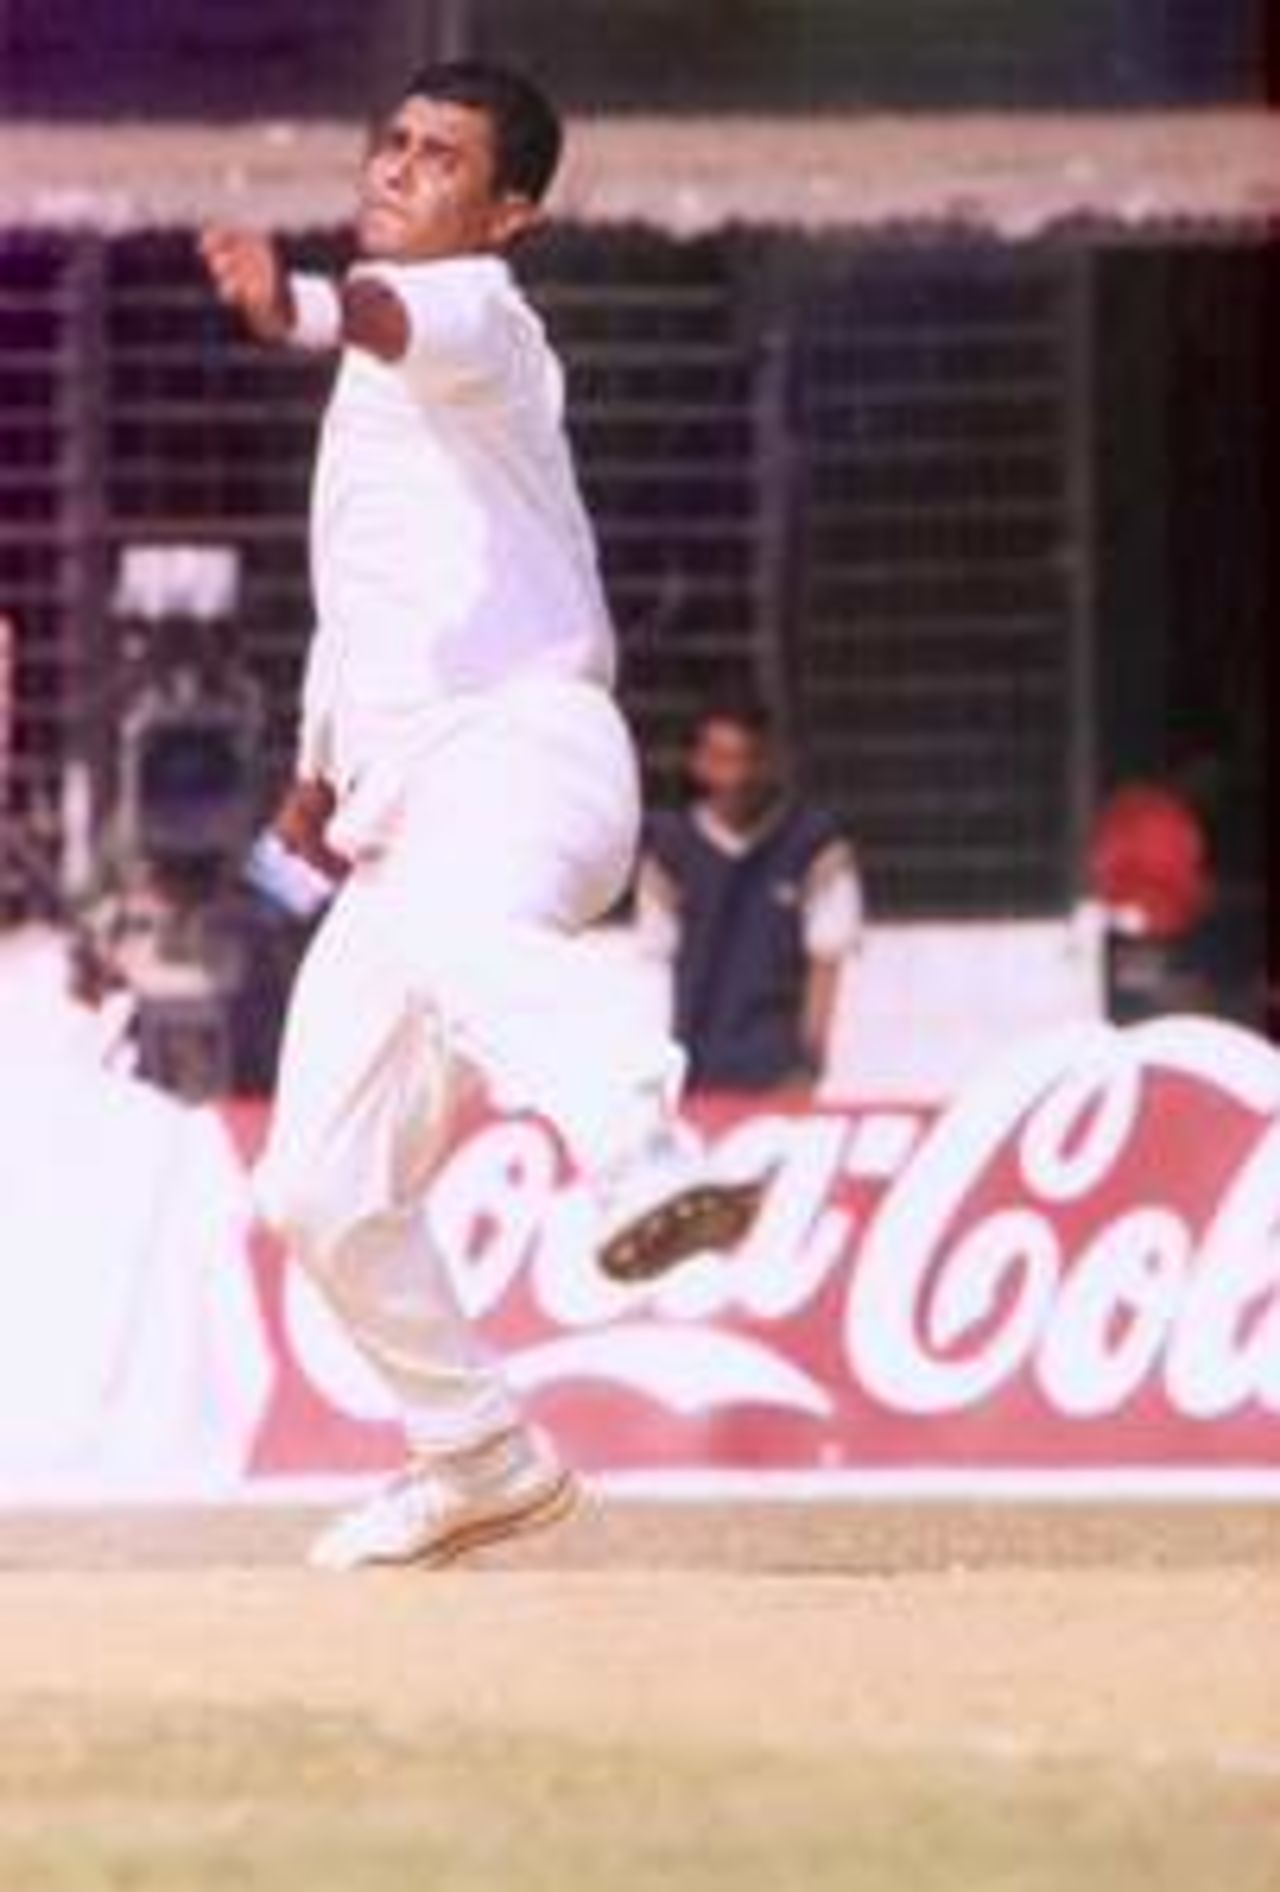 Waqar is delivering in the Dhaka Test